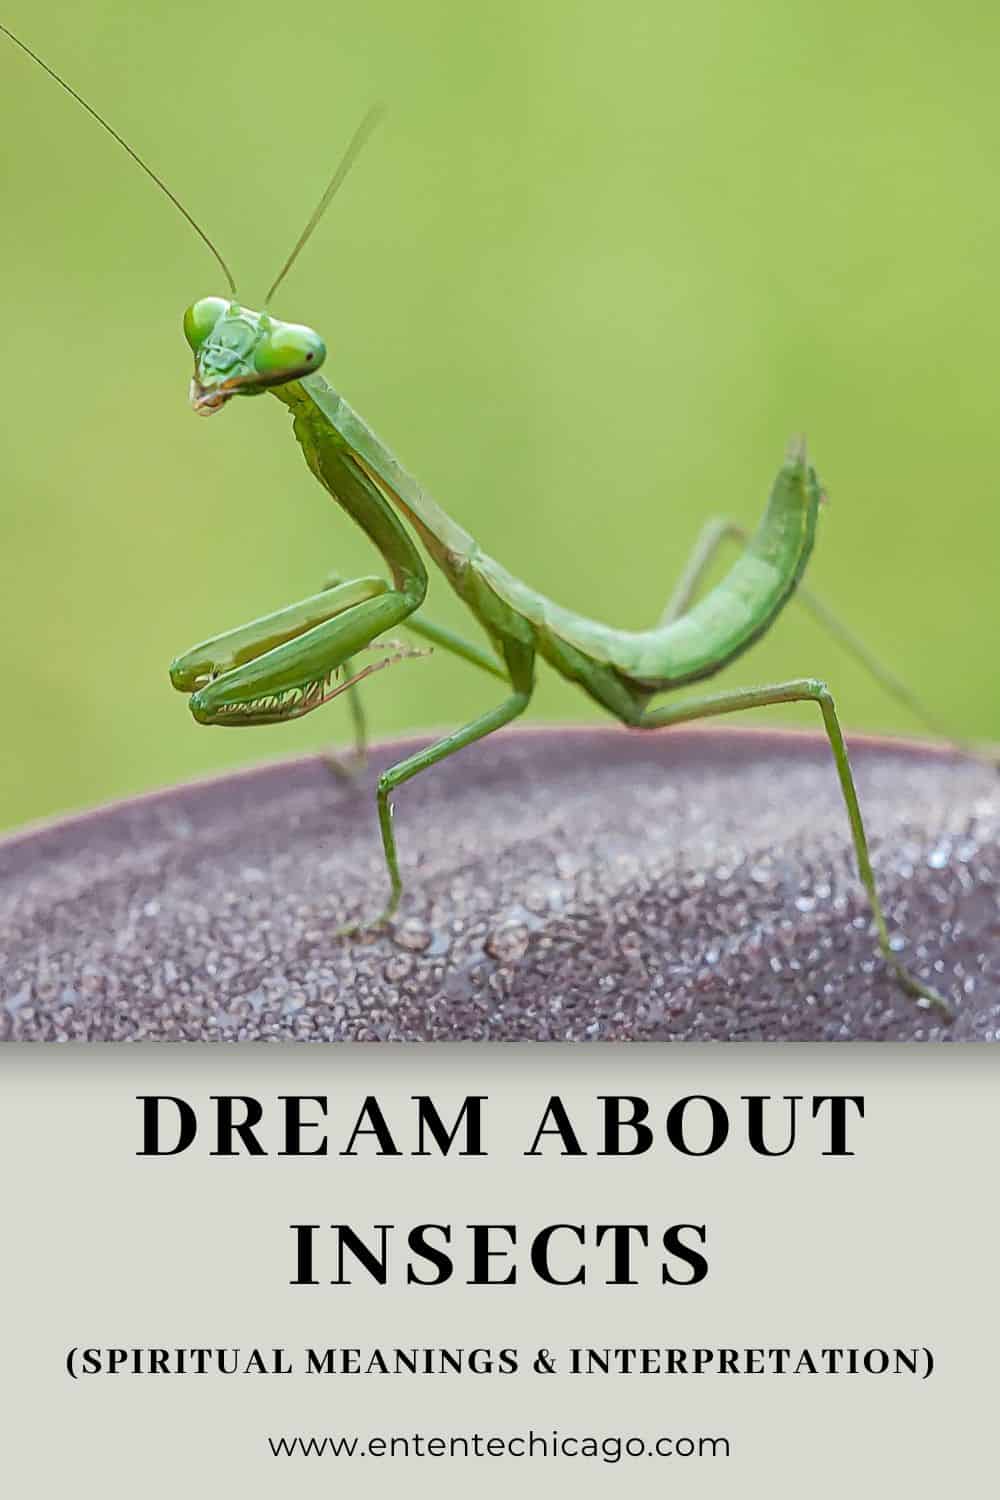 Dream About Insects (Spiritual Meanings & Interpretation)